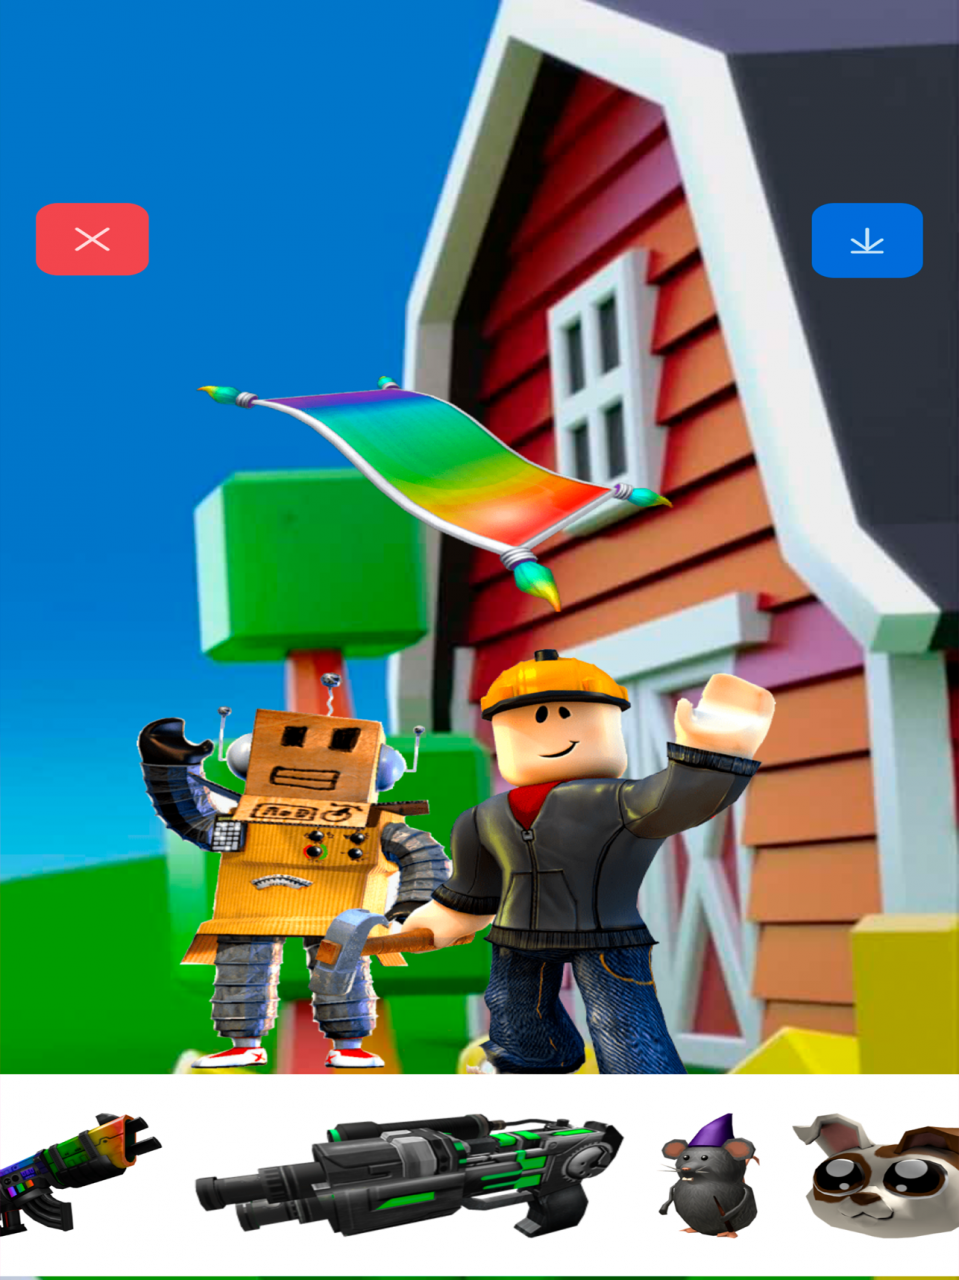 Skin Studio - Skins for Roblox by DreamTeam Apps